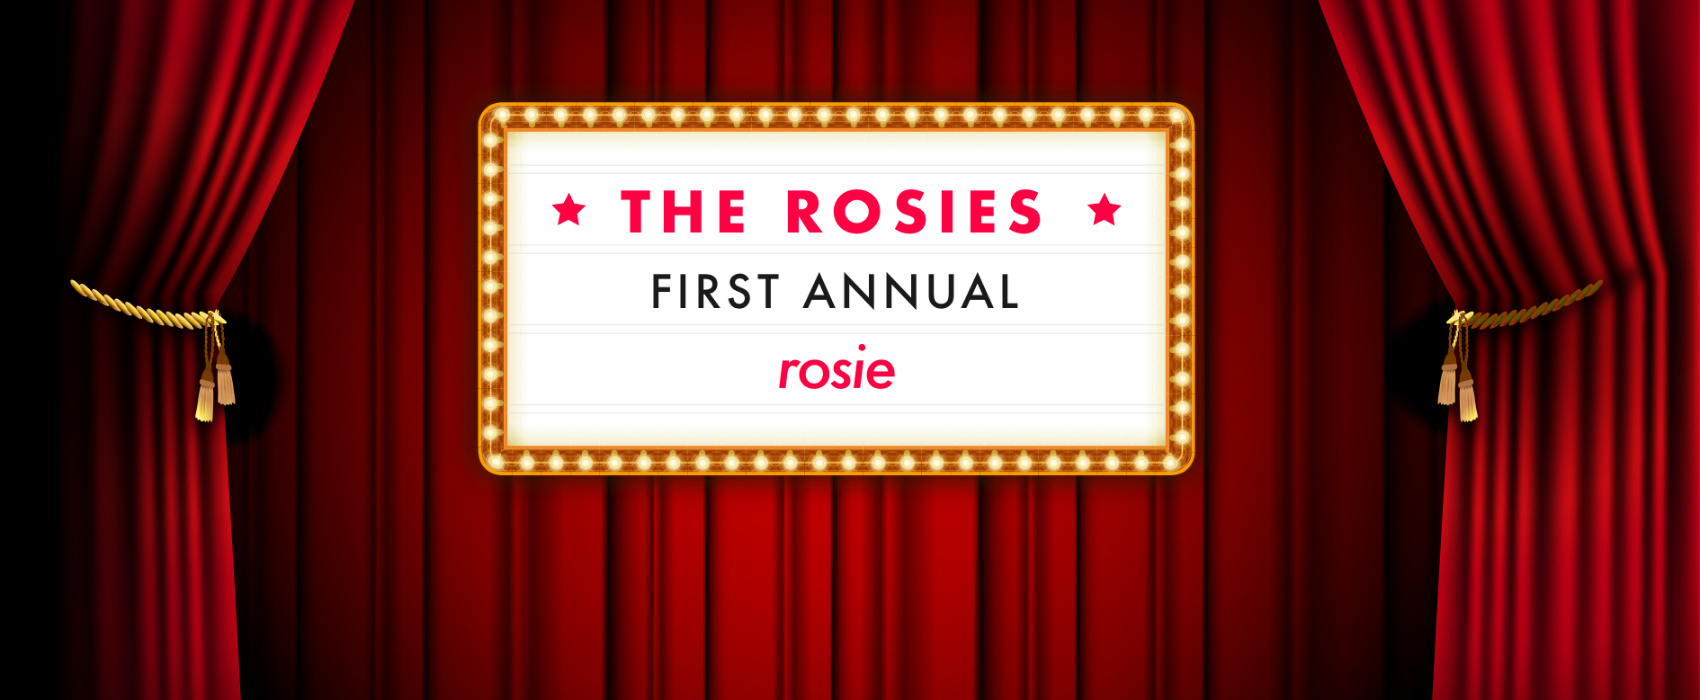 Rosie Recognizes Independent Retailers In The Industry’s First Dedicated Ecommerce Awards Event: “The Rosies”